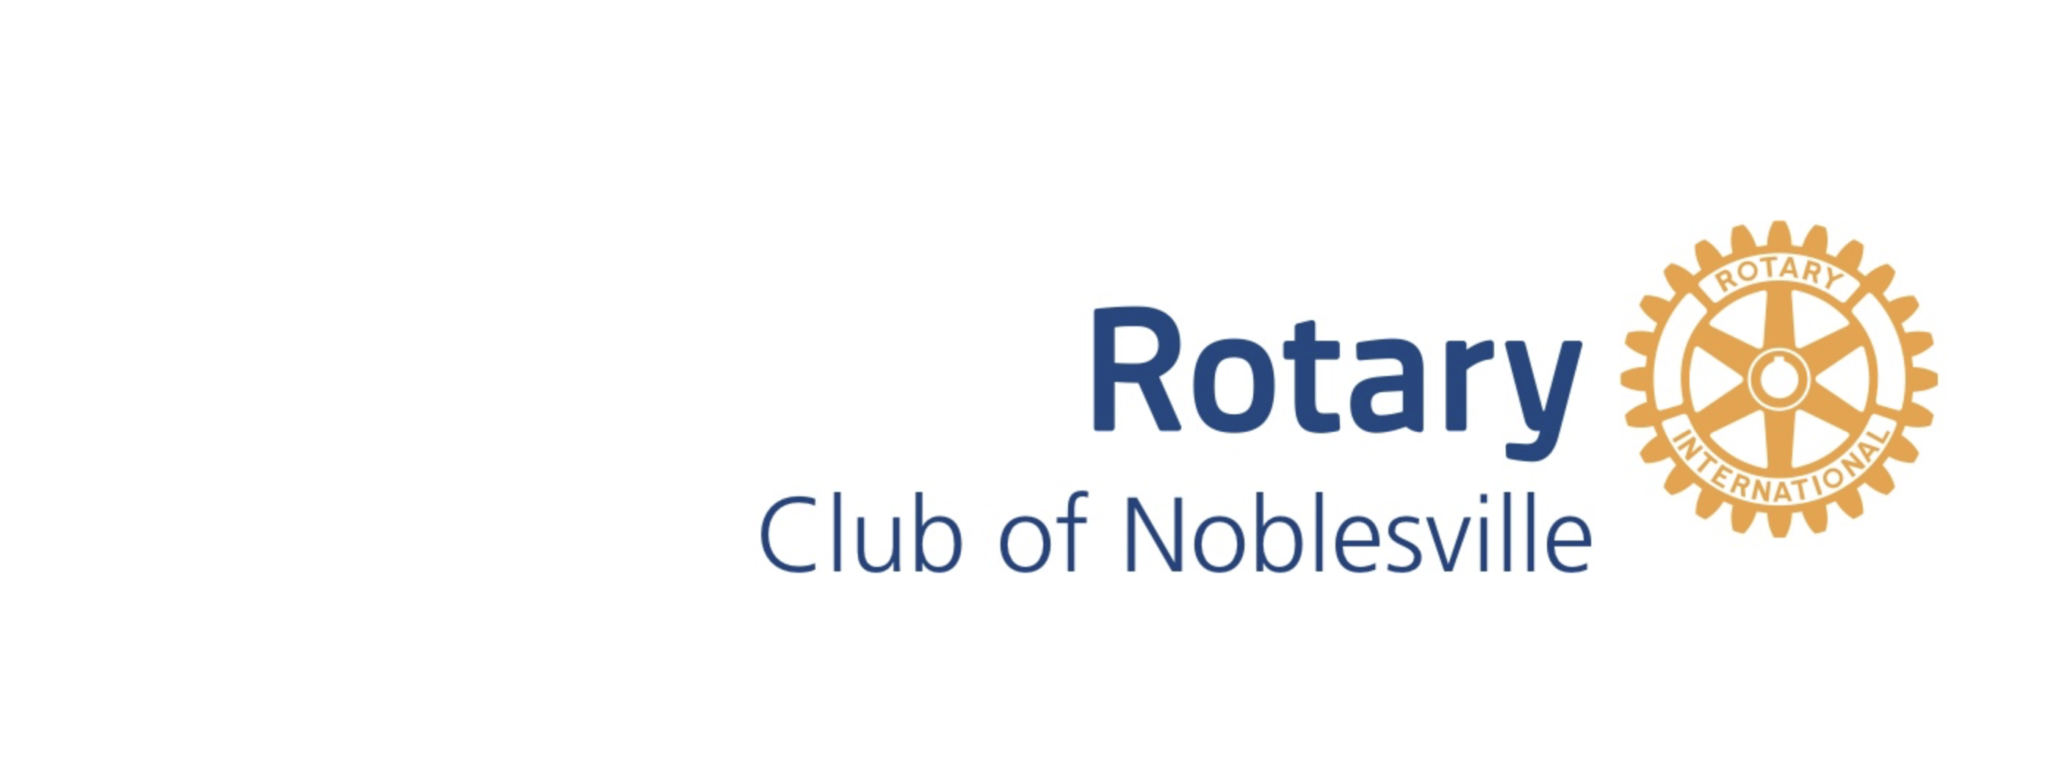 Noblesville Rotary Club